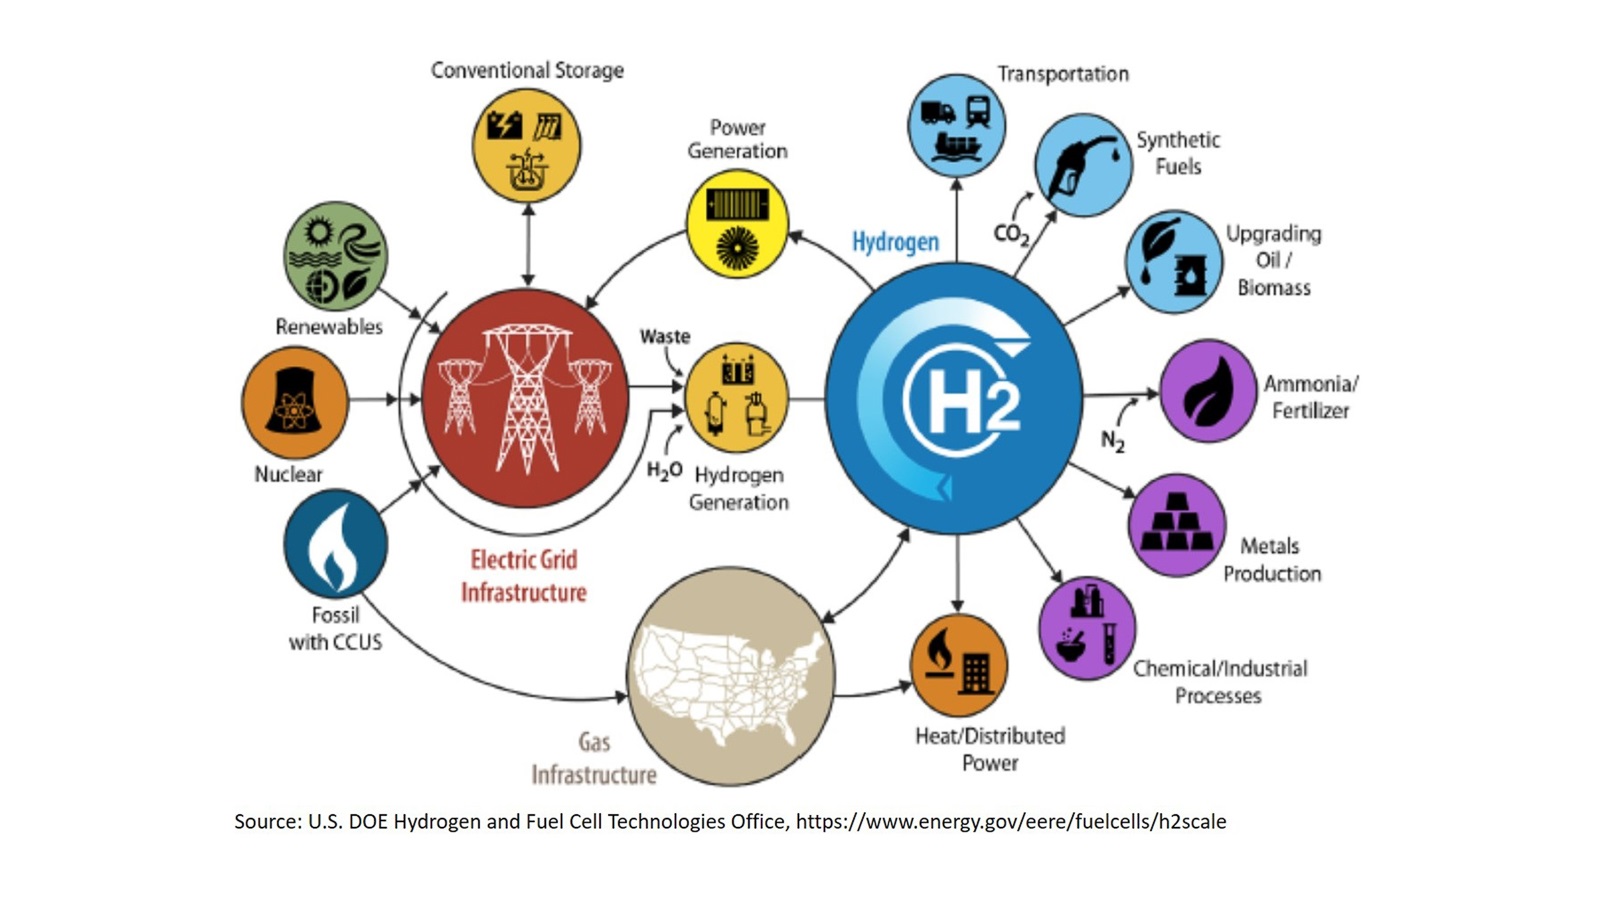 The diagram symbolizes H2@Scale, a U.S. Department of Energy (DOE) initiative that brings together stakeholders to advance affordable hydrogen production, transport, storage and utilization to enable decarbonization and revenue opportunities across multiple sectors. (Image by U.S. DOE Hydrogen and Fuel Cell Technologies Office.)